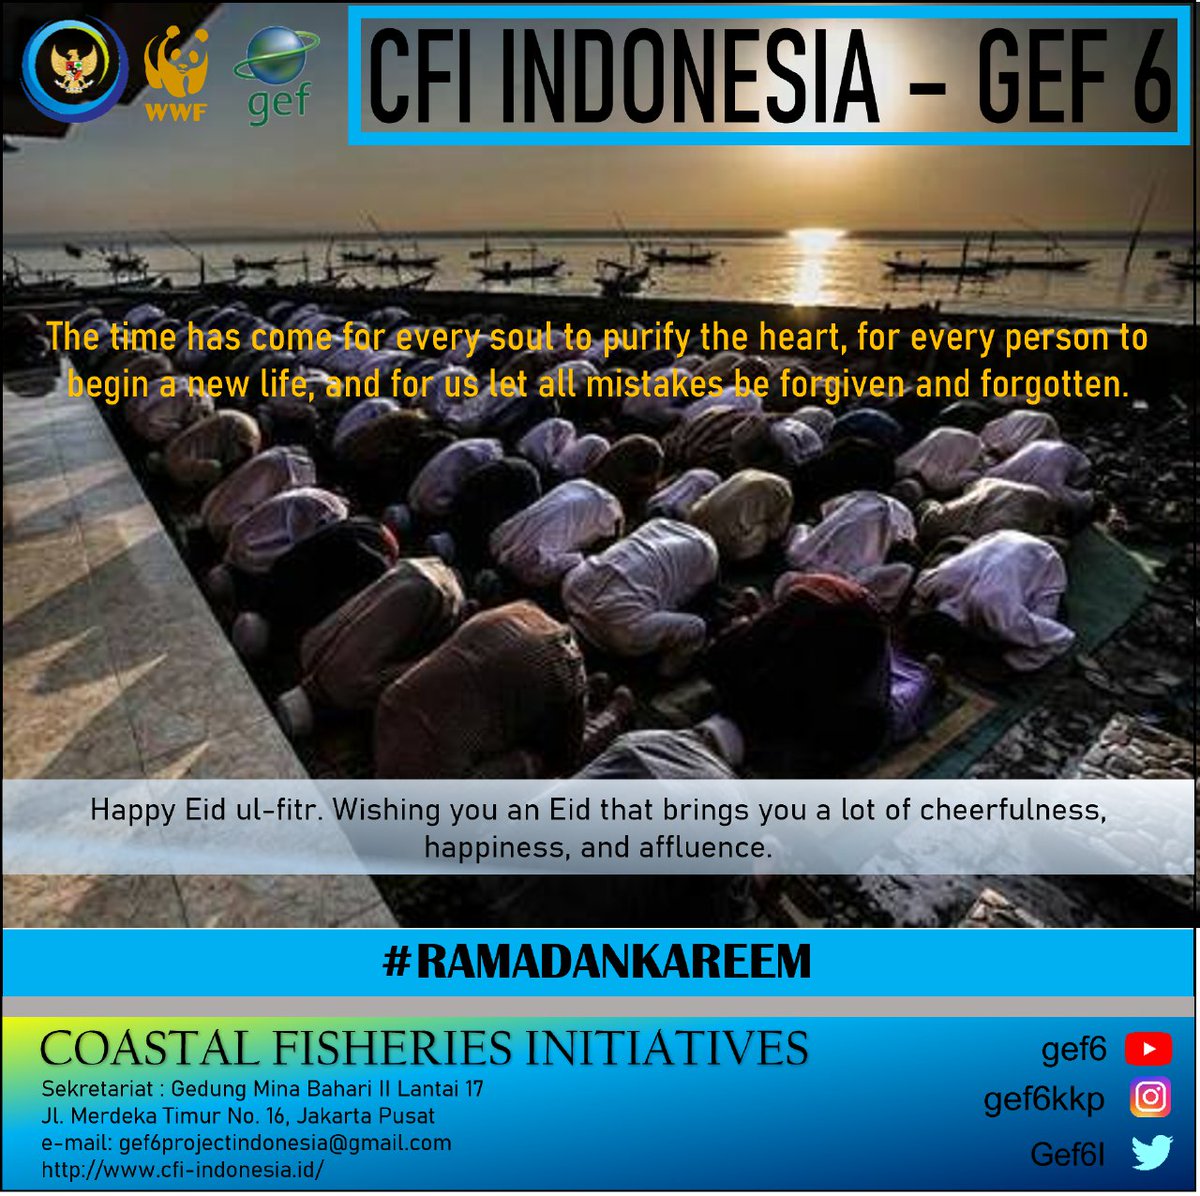 Wishing you all the best thing in Eid 2023. Happy Eid Mubarak, may Allah accept all of your good deeds!
*CFI Indonesia Team

#CFIgef #CFIfamily 
@swtrenggono @kkpgoid 
@djpt_kkp @wwf @theGEF